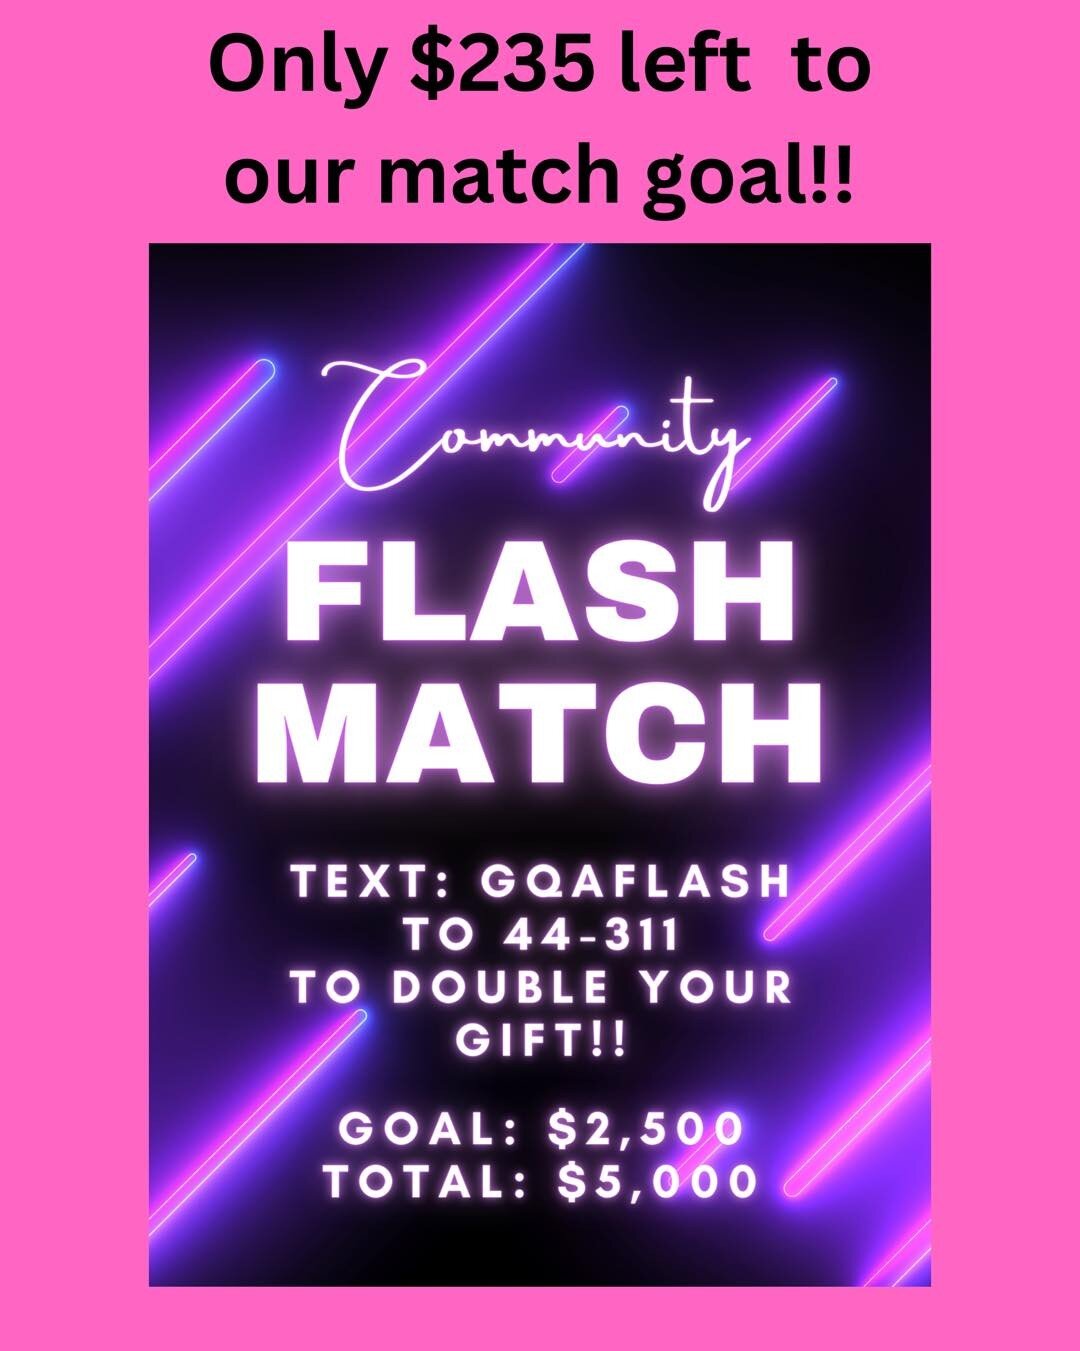 We only need $235 to reach our match goal! 

Thank you to all that have given - the $10 and $25 donations are what makes a match like this go. Please share this with a friend and ask them if they can give.